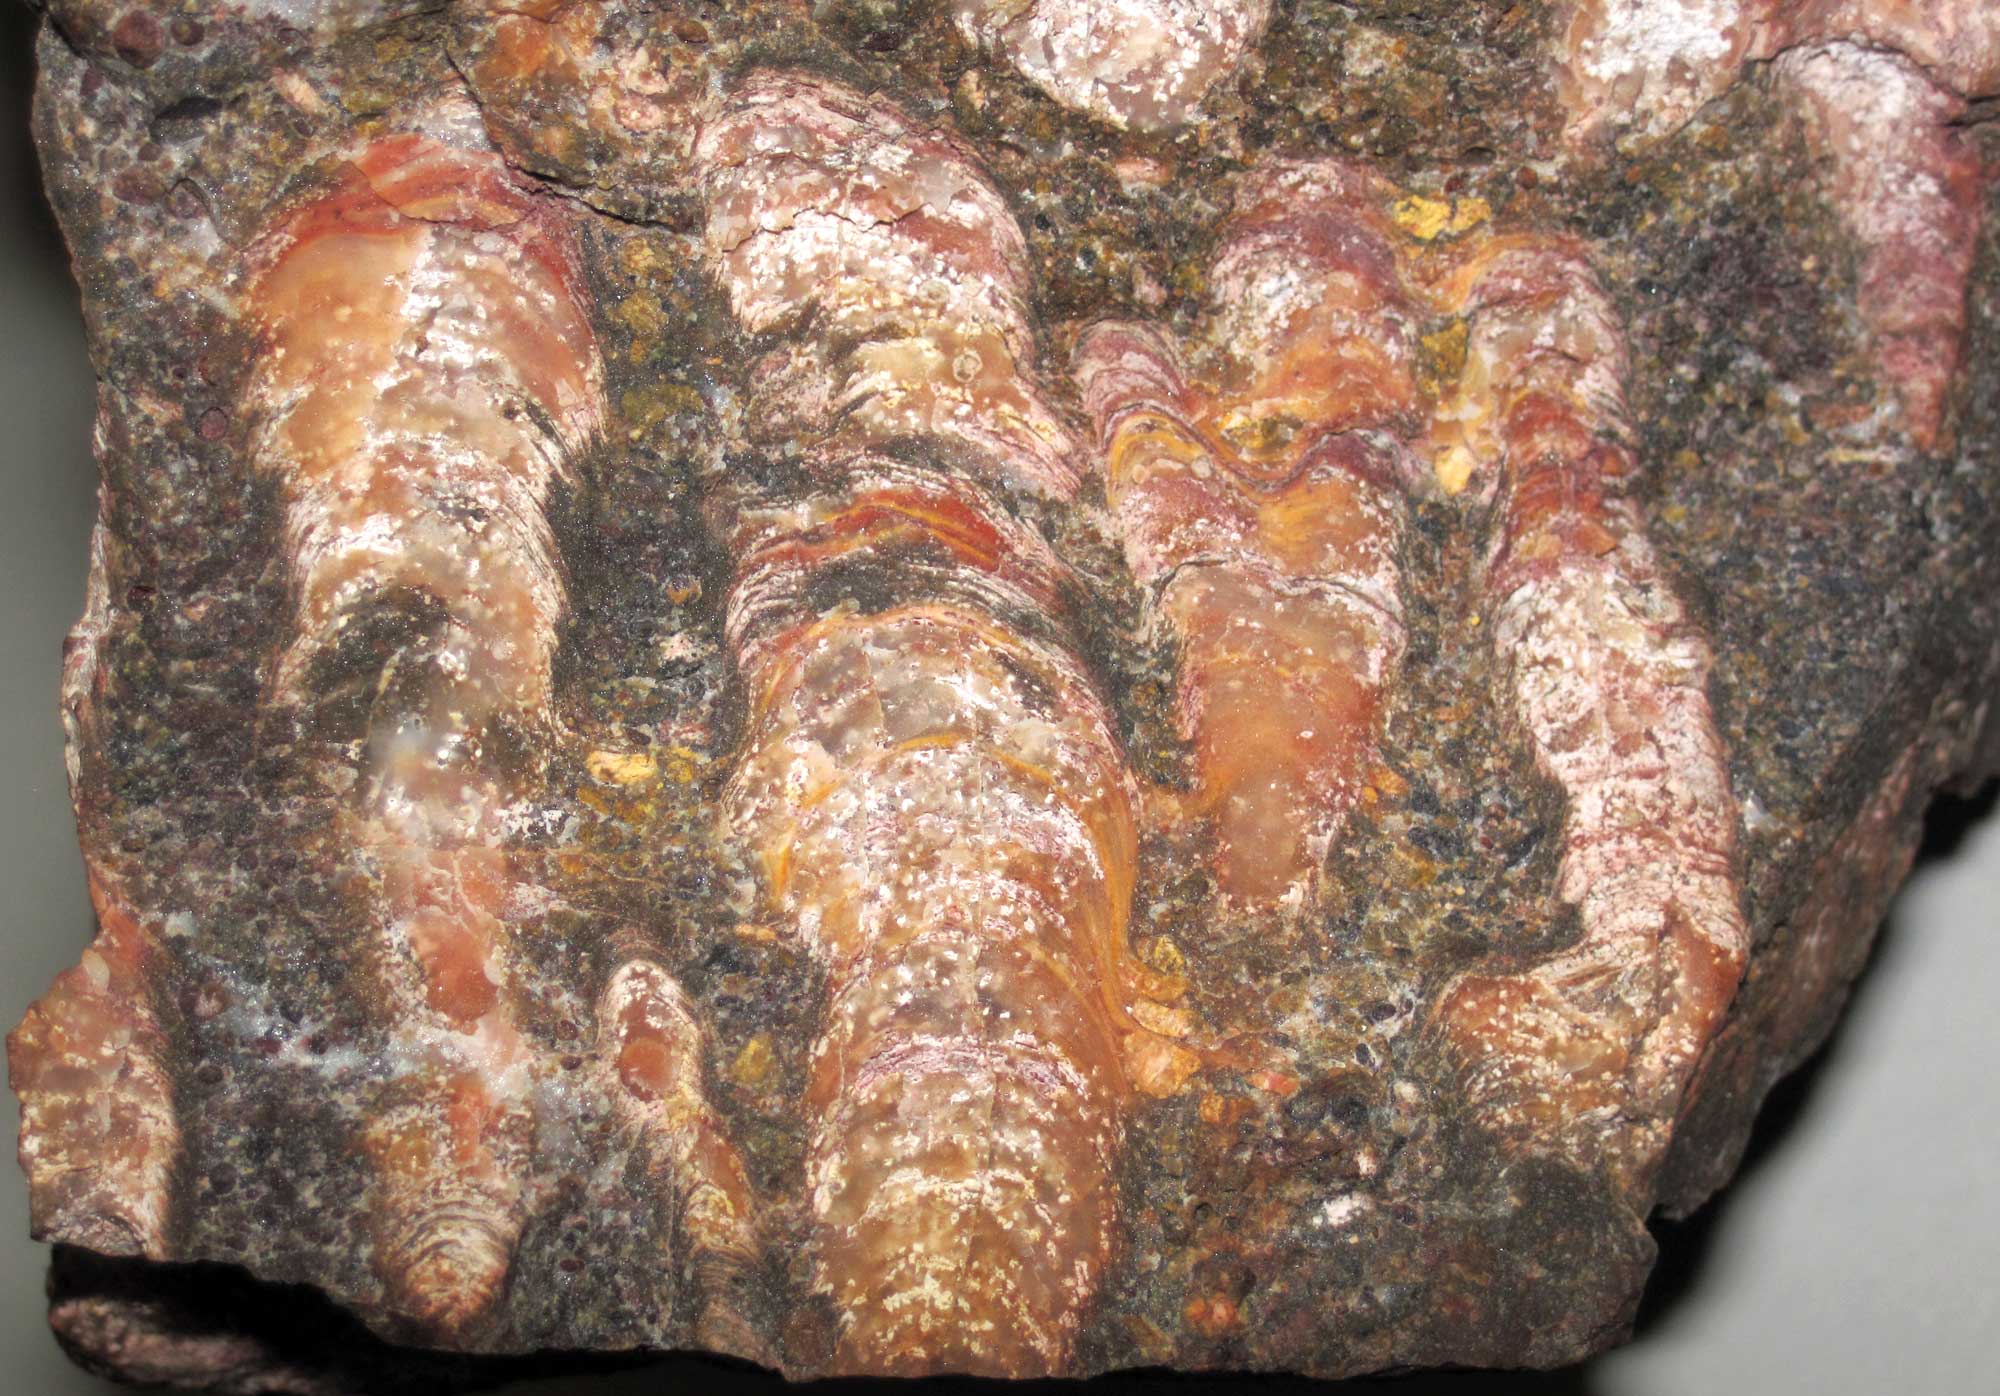 Photograph of a stromatolite from the Paleoproterozoic of Minnesota. The photo shows a dark brown rock with thick, vertical, pinkish stripes on it. The strips have a pattern of dome-shaped layers overlain on them, indicating that they are stromatolites.